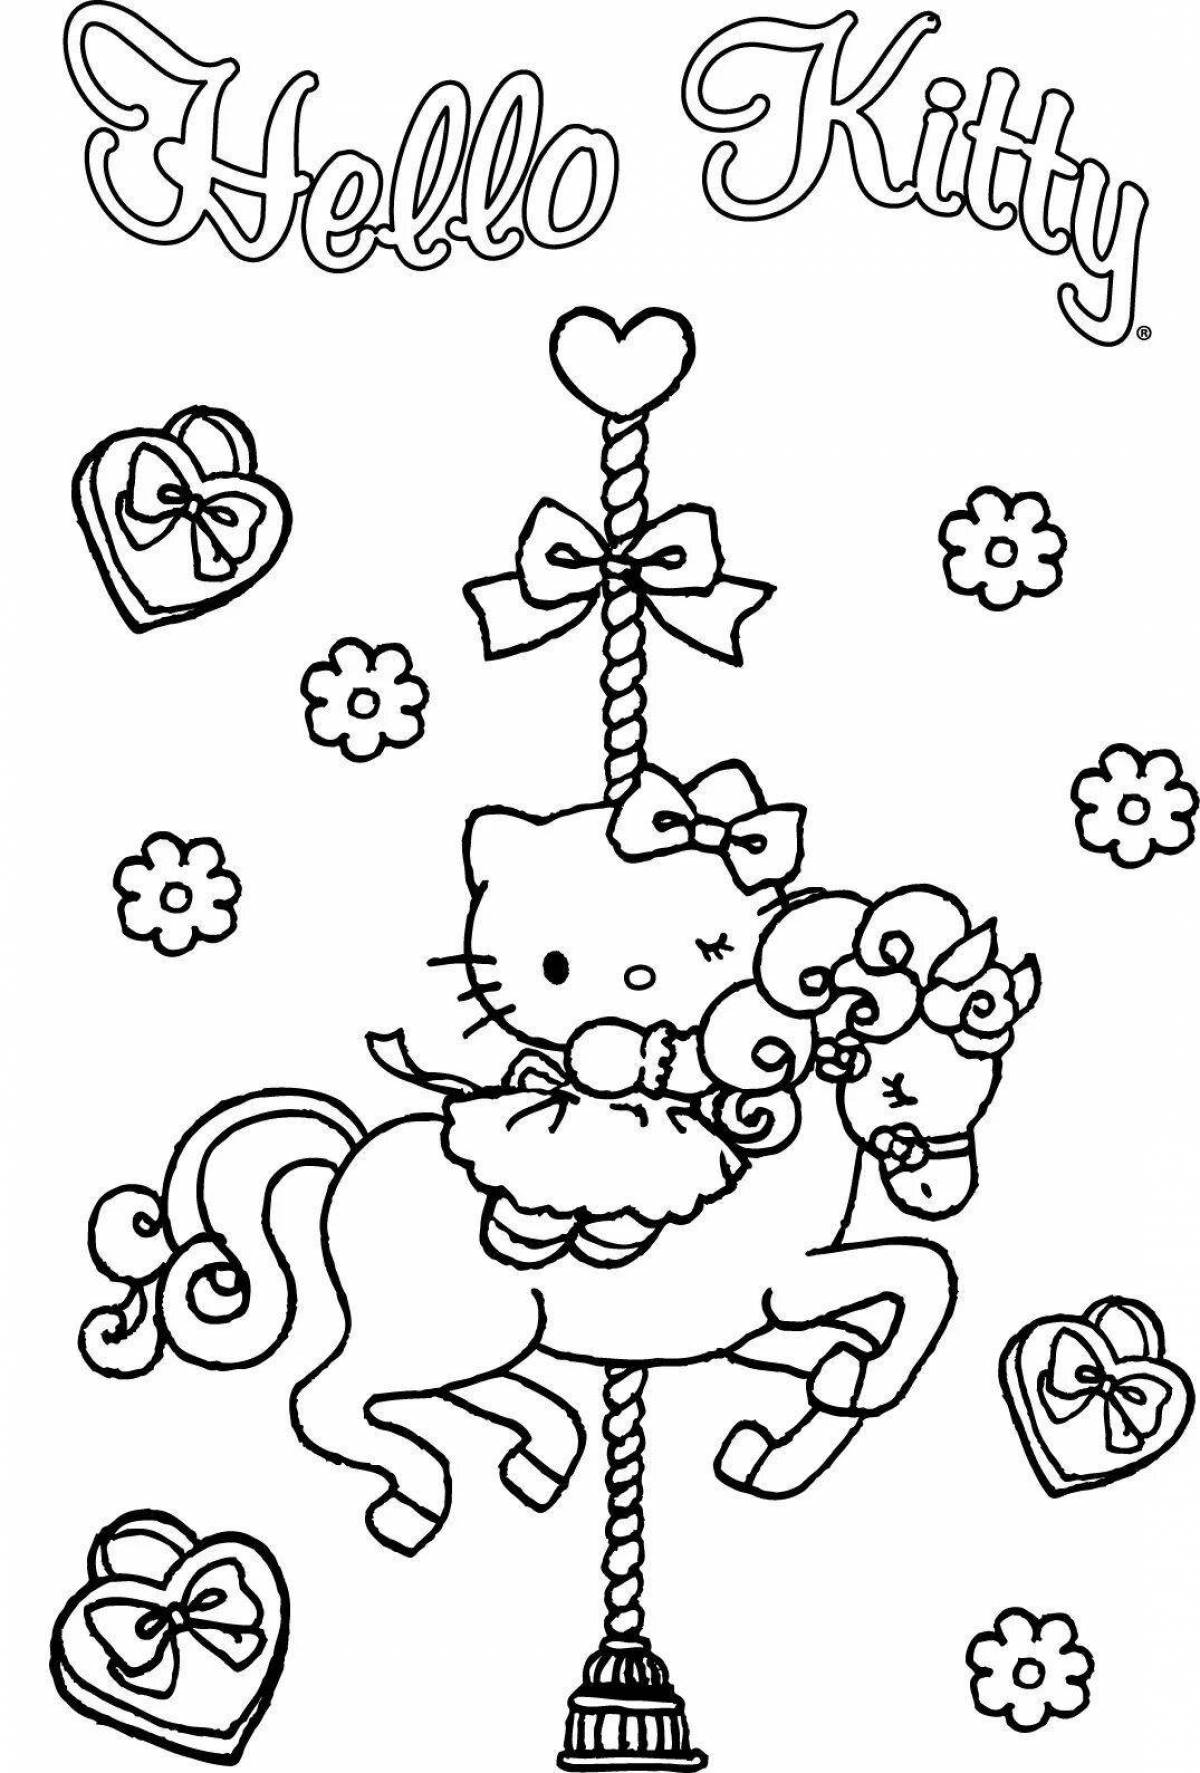 Merry Christmas kitty coloring page